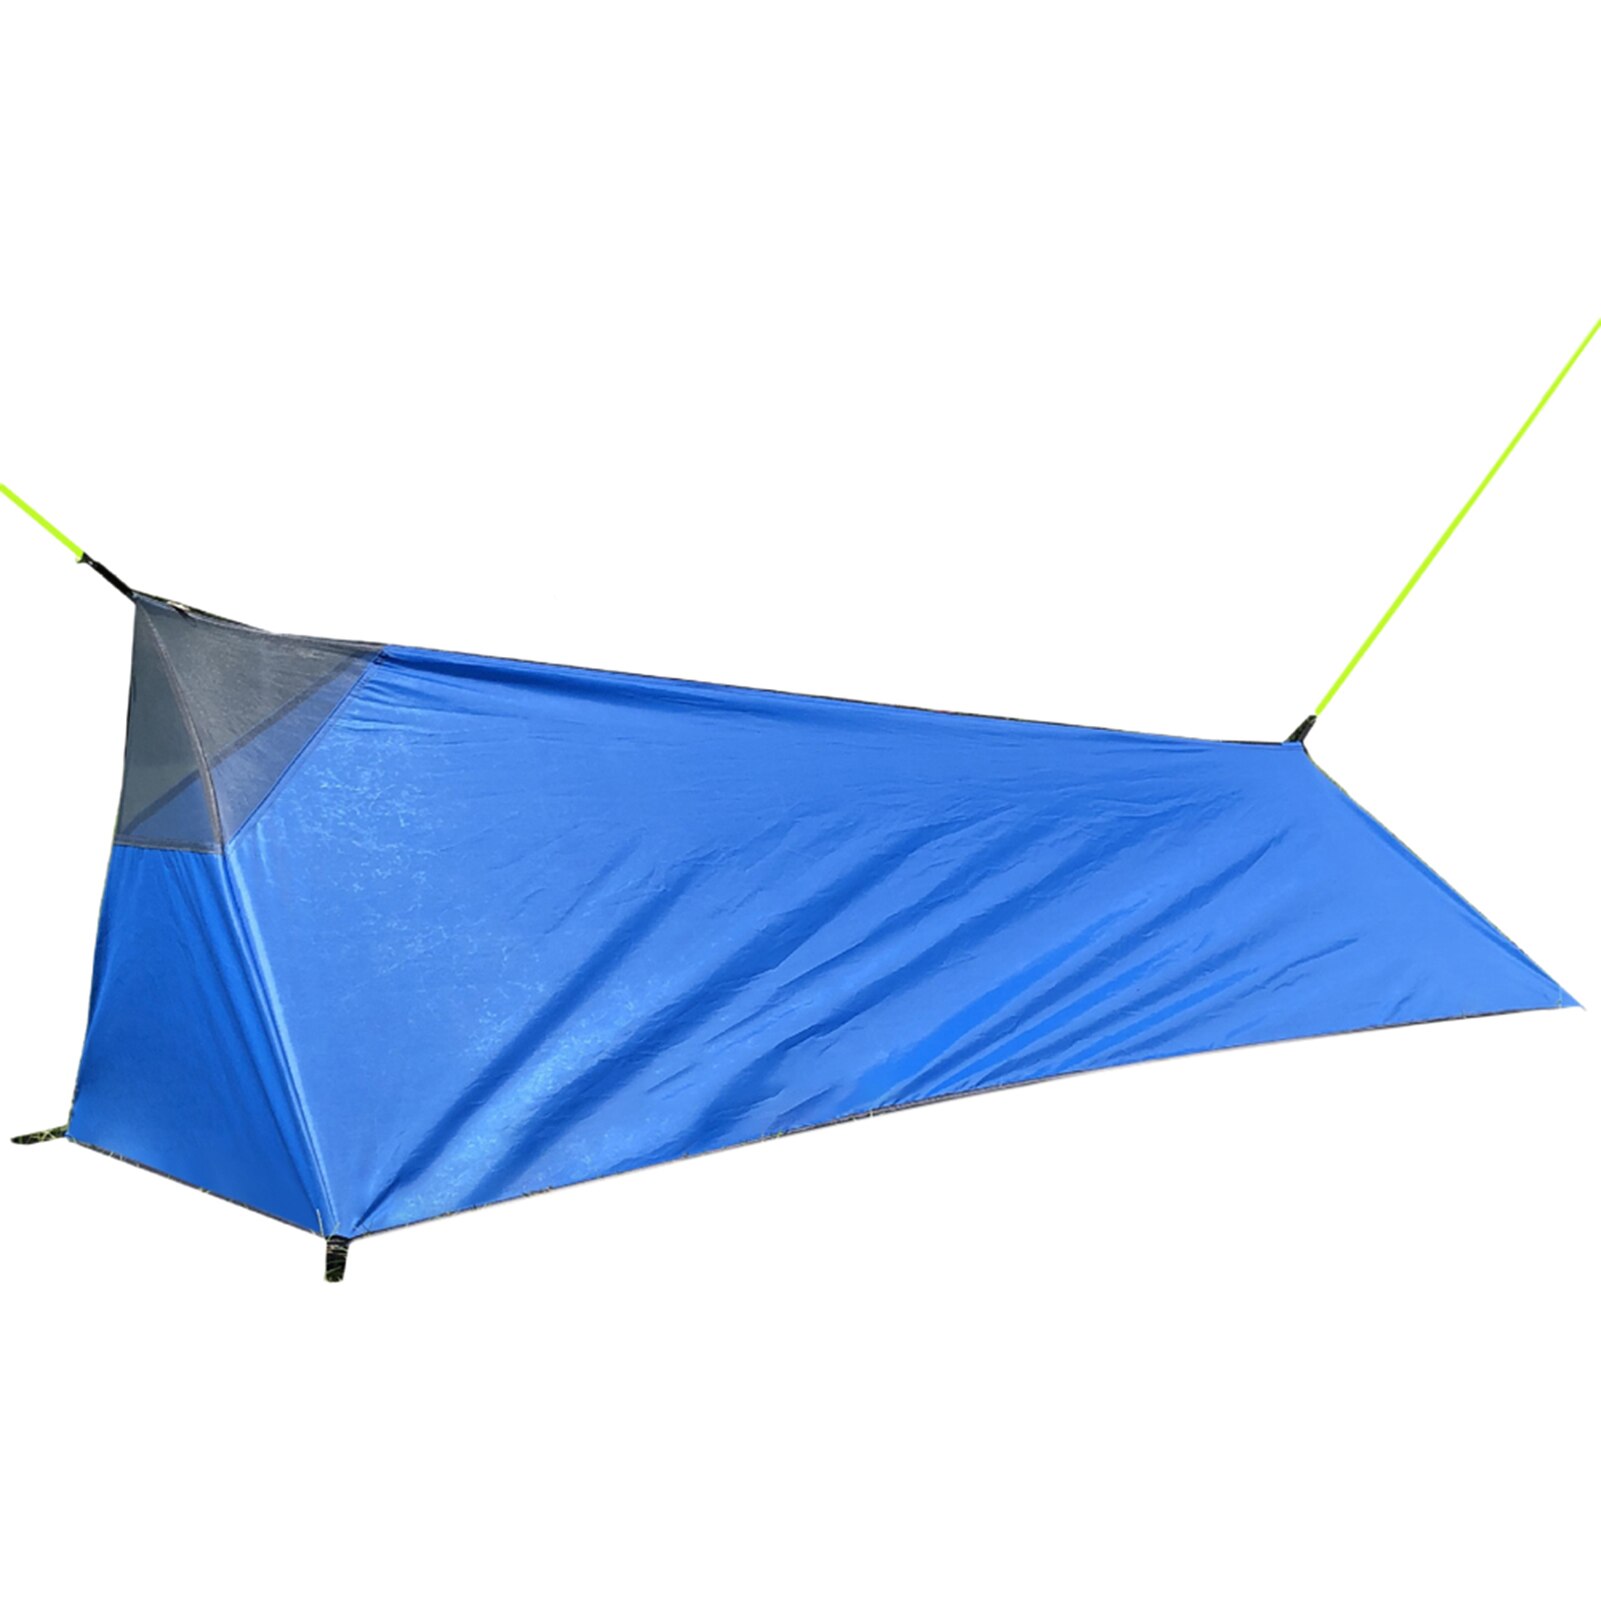 A Tower Ultralight Tent 1 Person Camping Tent Portable Canopy Hiking Mountaining Backpacking Waterproof Single Tent: Blue